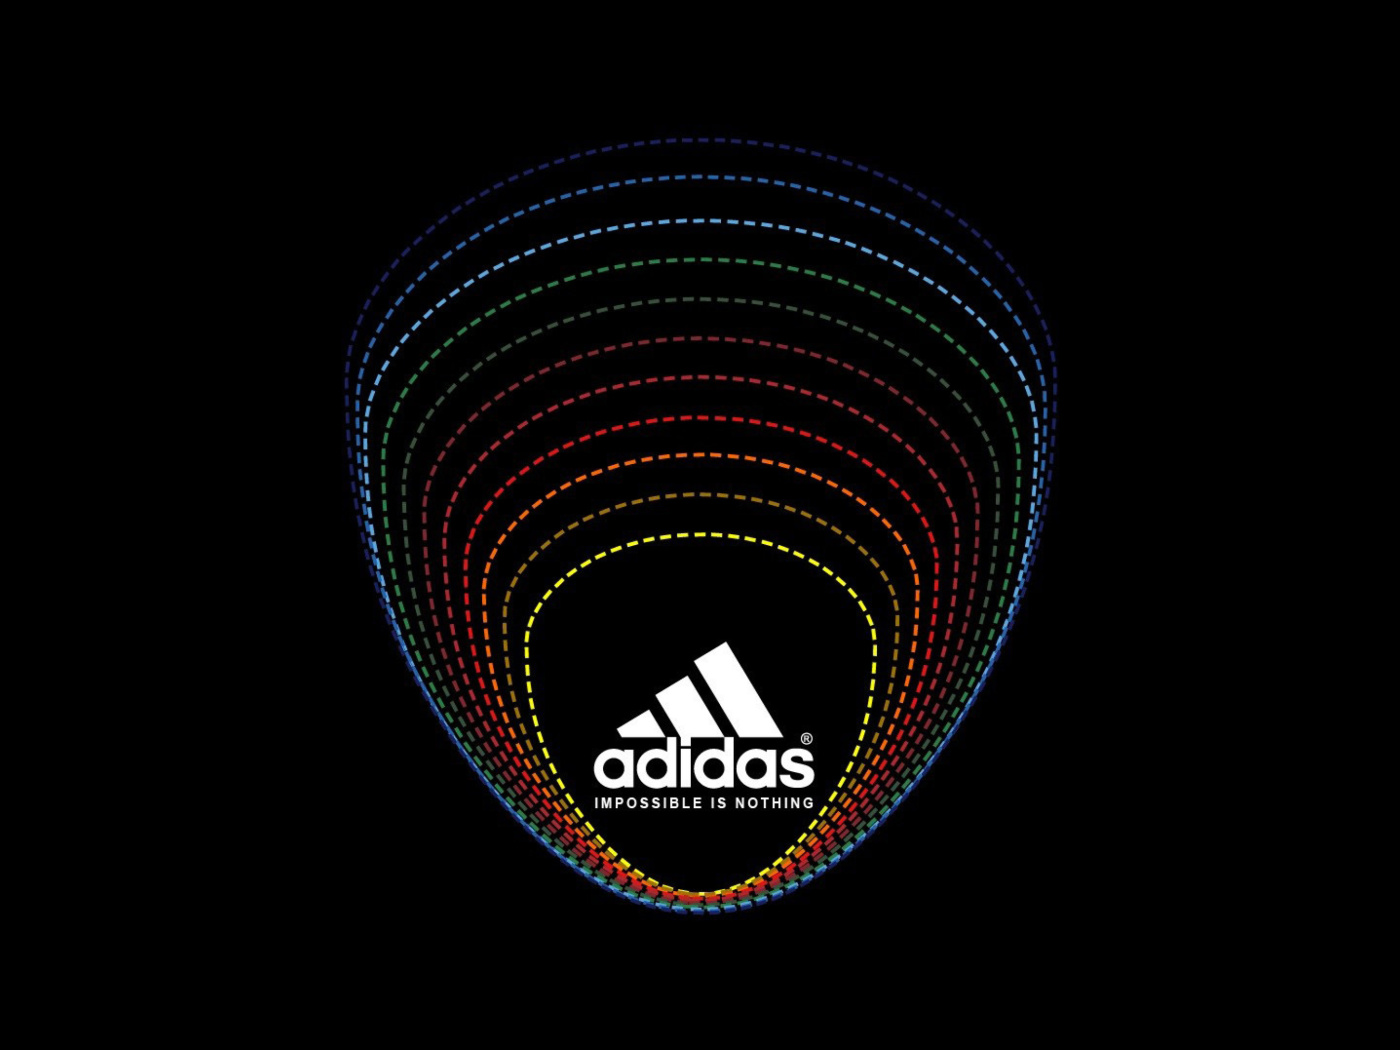 Обои Adidas Tagline, Impossible is Nothing 1400x1050